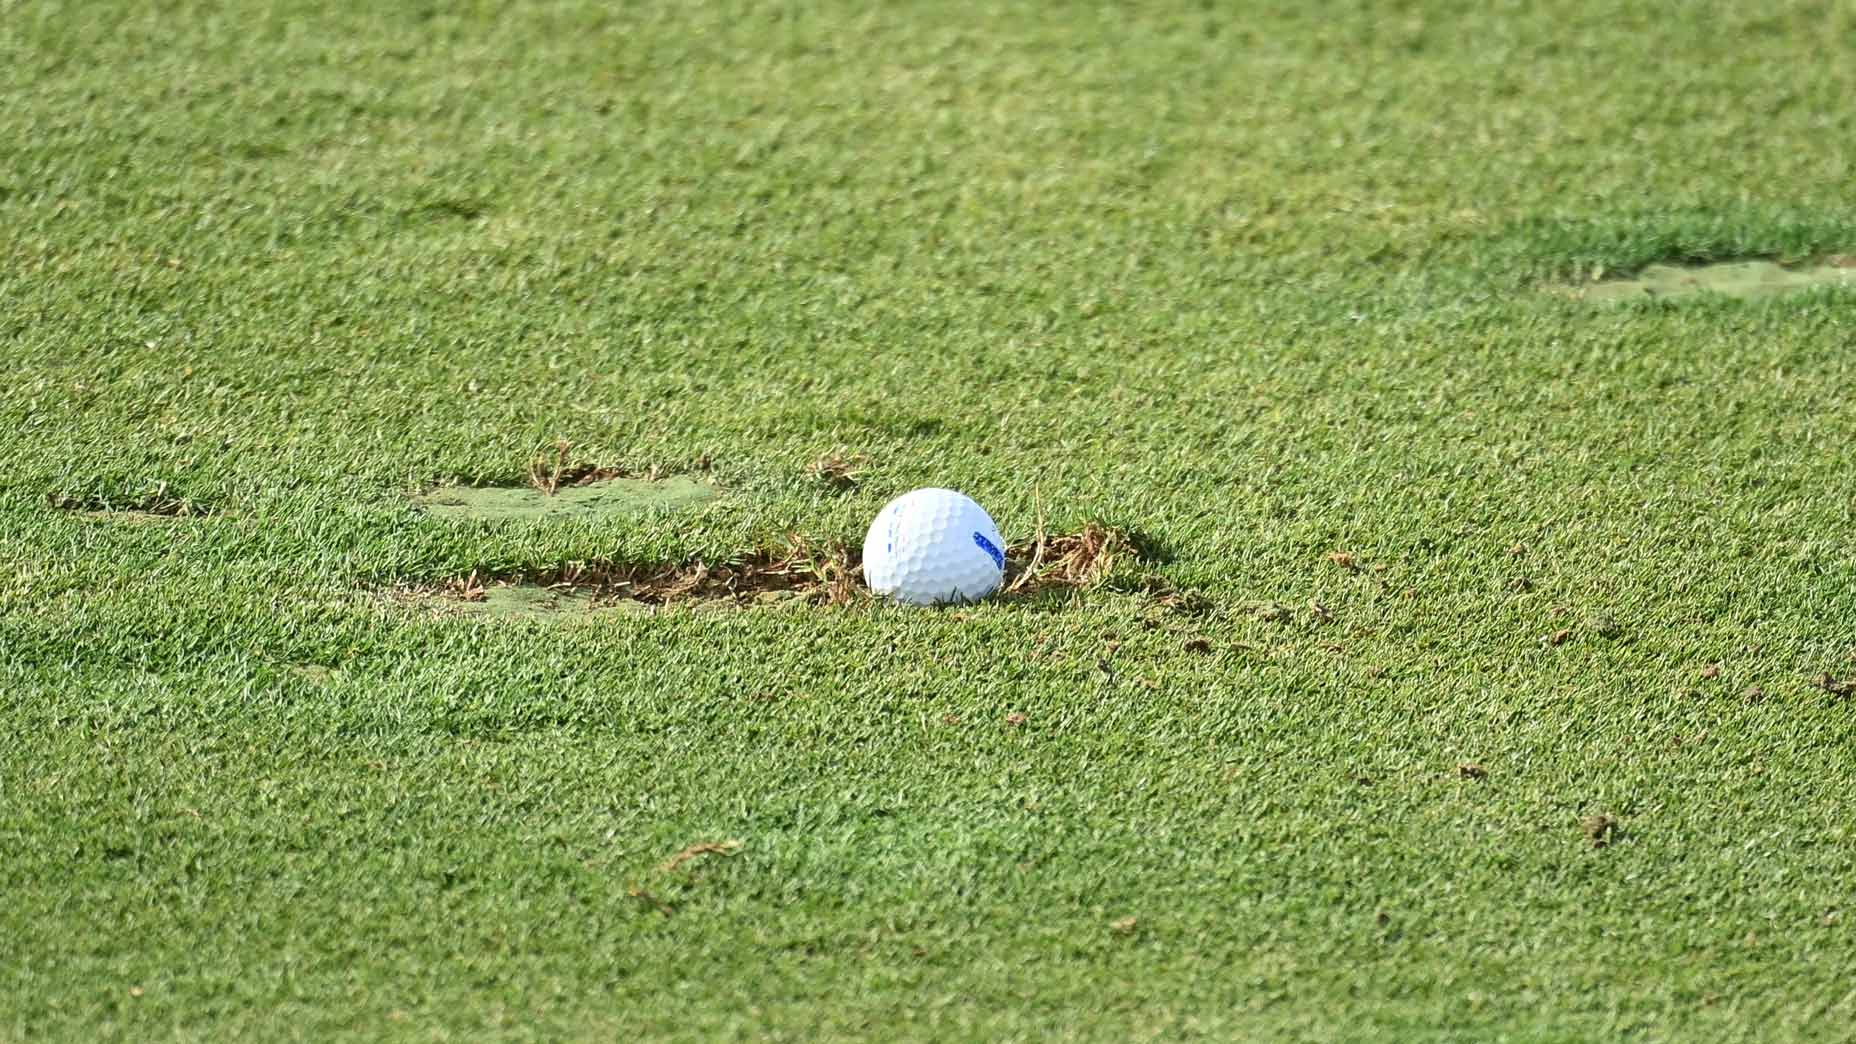 What's the best way to hit out of a divot? LPGA pro explains